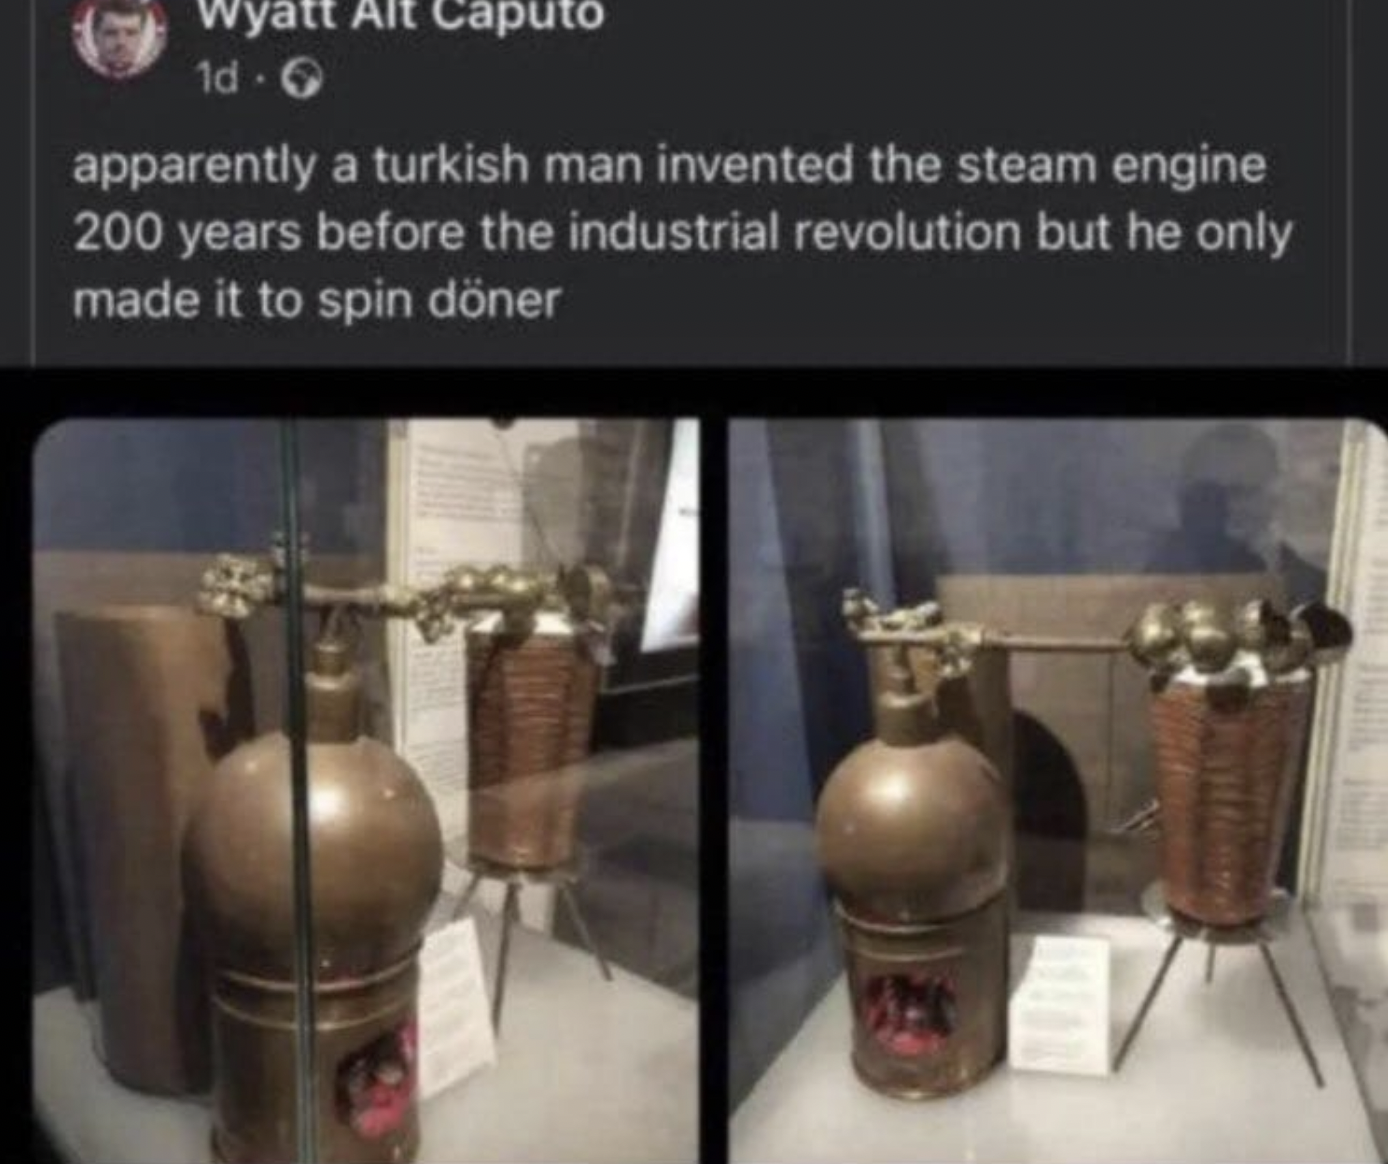 steam engine kebab - Wyatt Alt Caputo 1d apparently a turkish man invented the steam engine 200 years before the industrial revolution but he only made it to spin dner